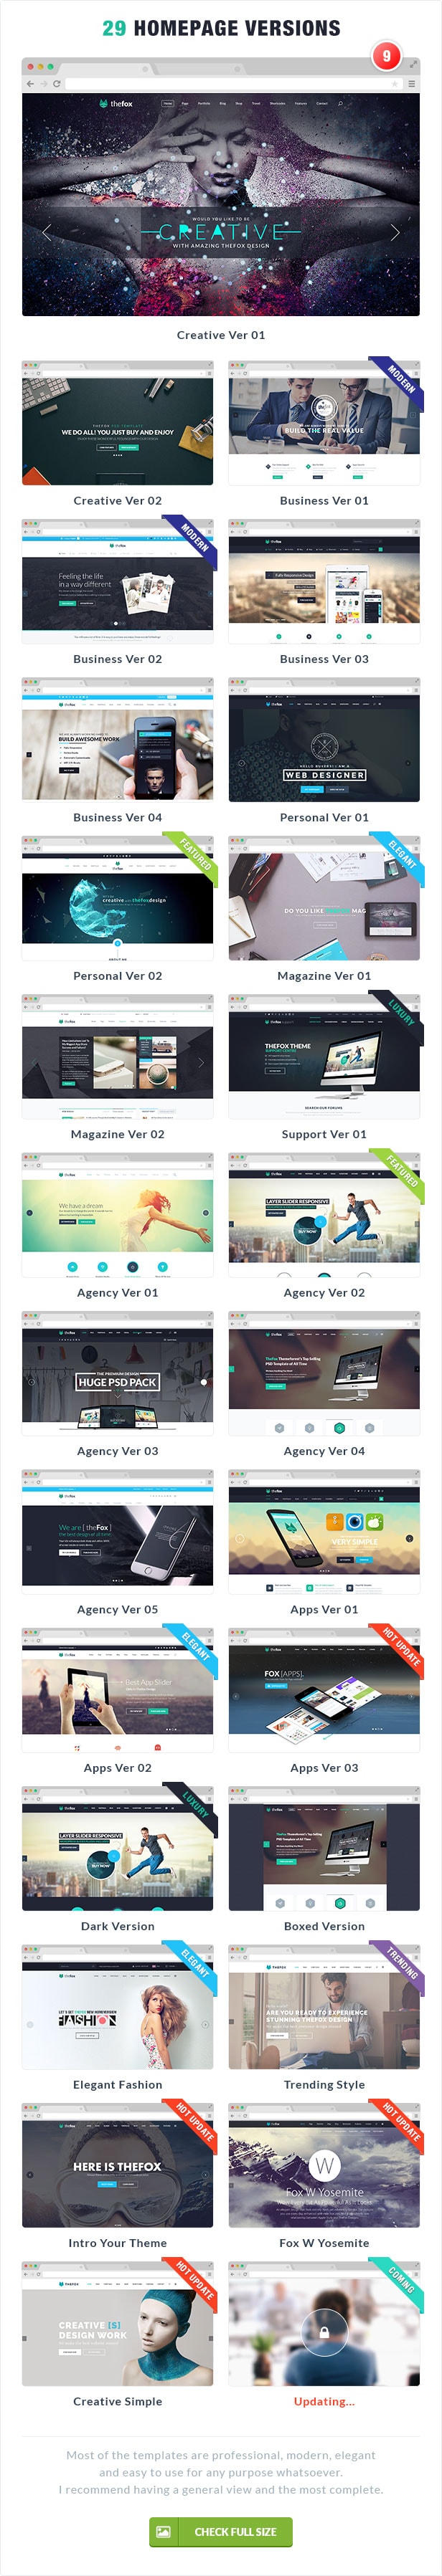 29 elegant homepage version - business - personal - agency - apps - creative - magazine - support - thefox psd download - professional